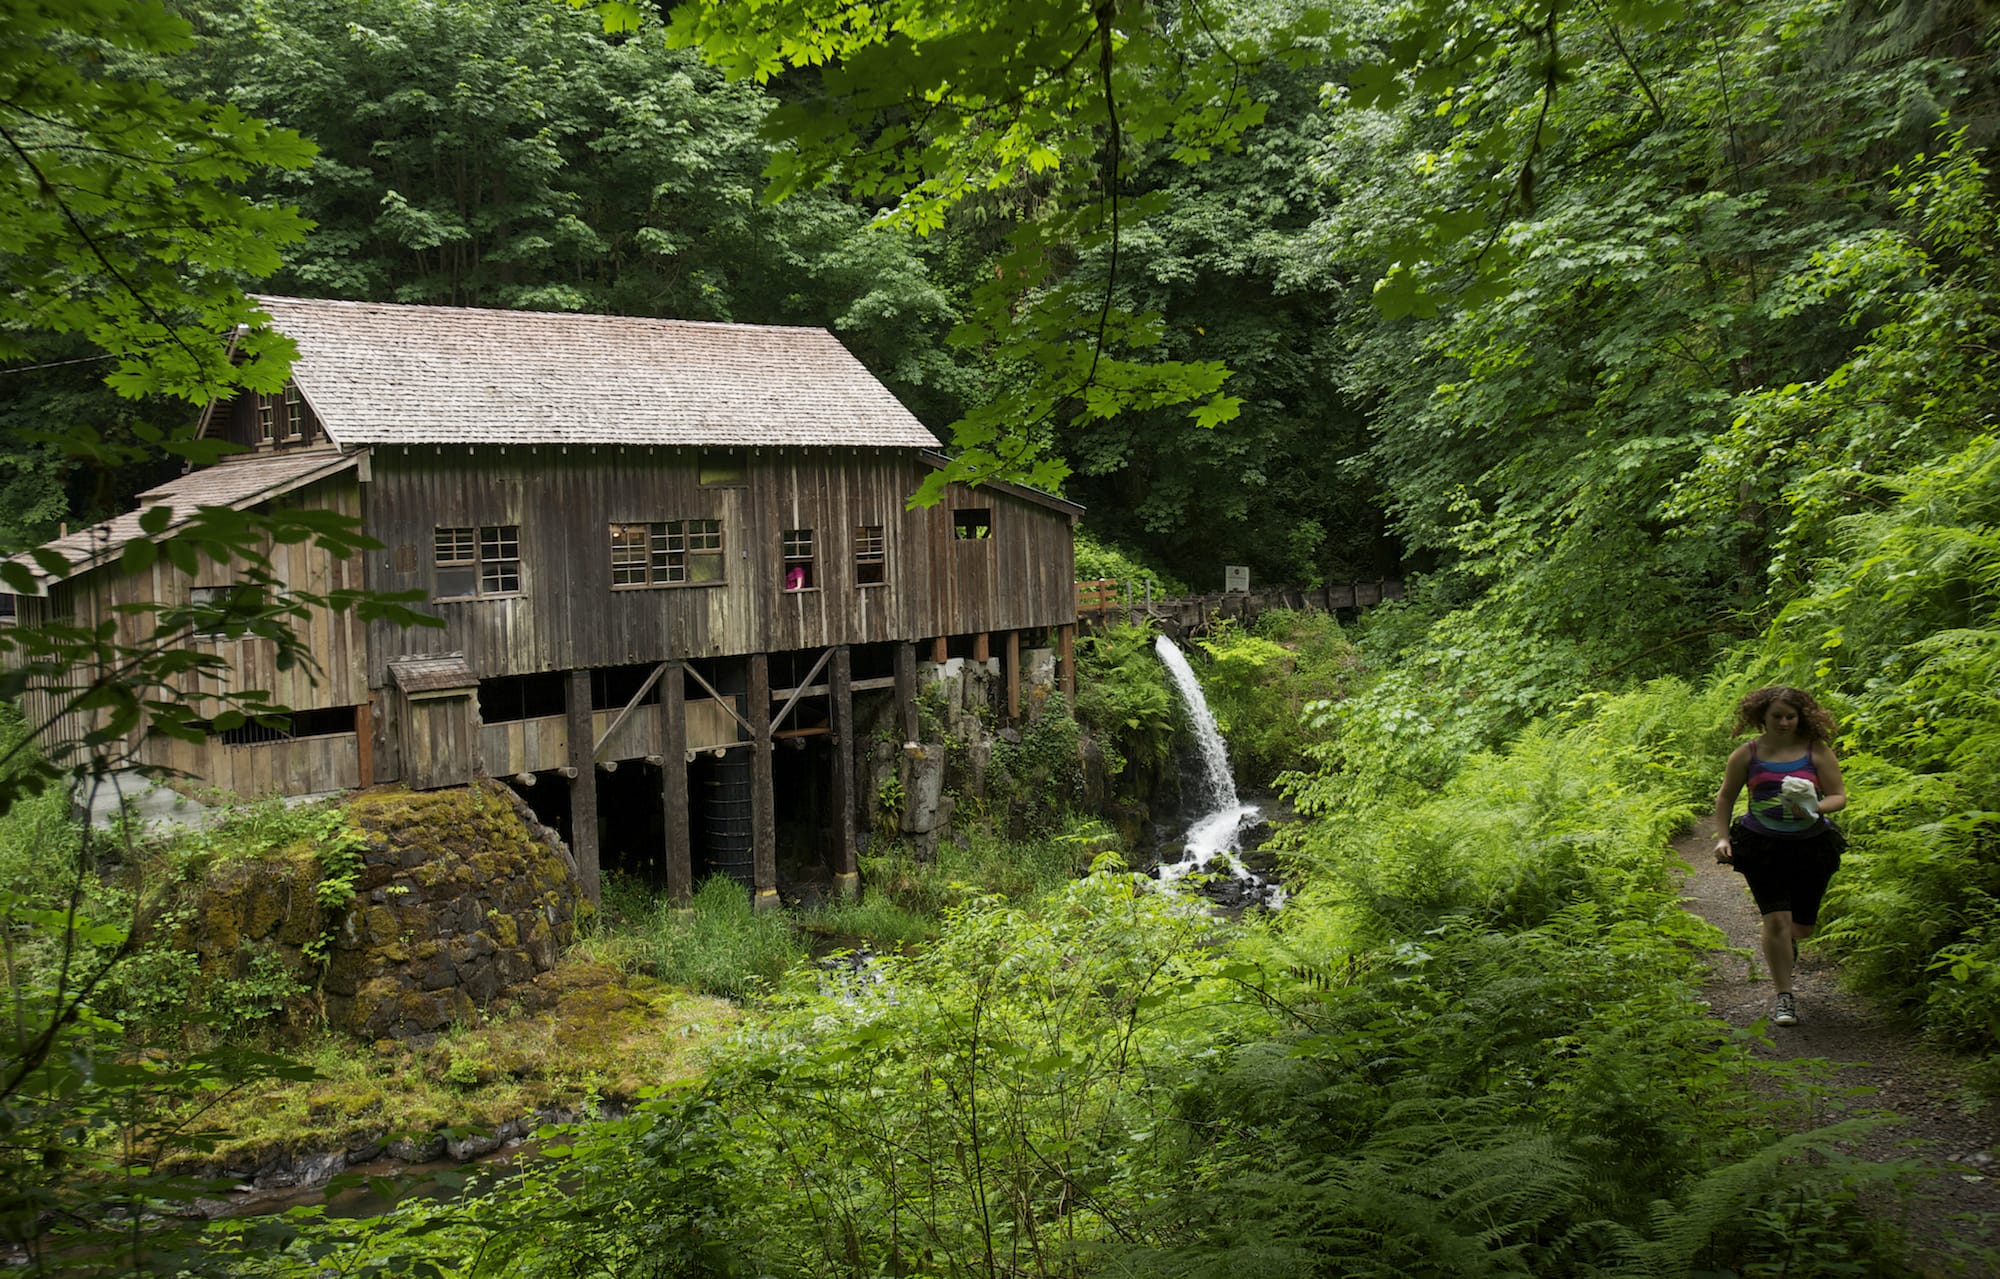 The Cedar Creek Grist Mill is open to visitors for tours and sampling of flour and baked goods.